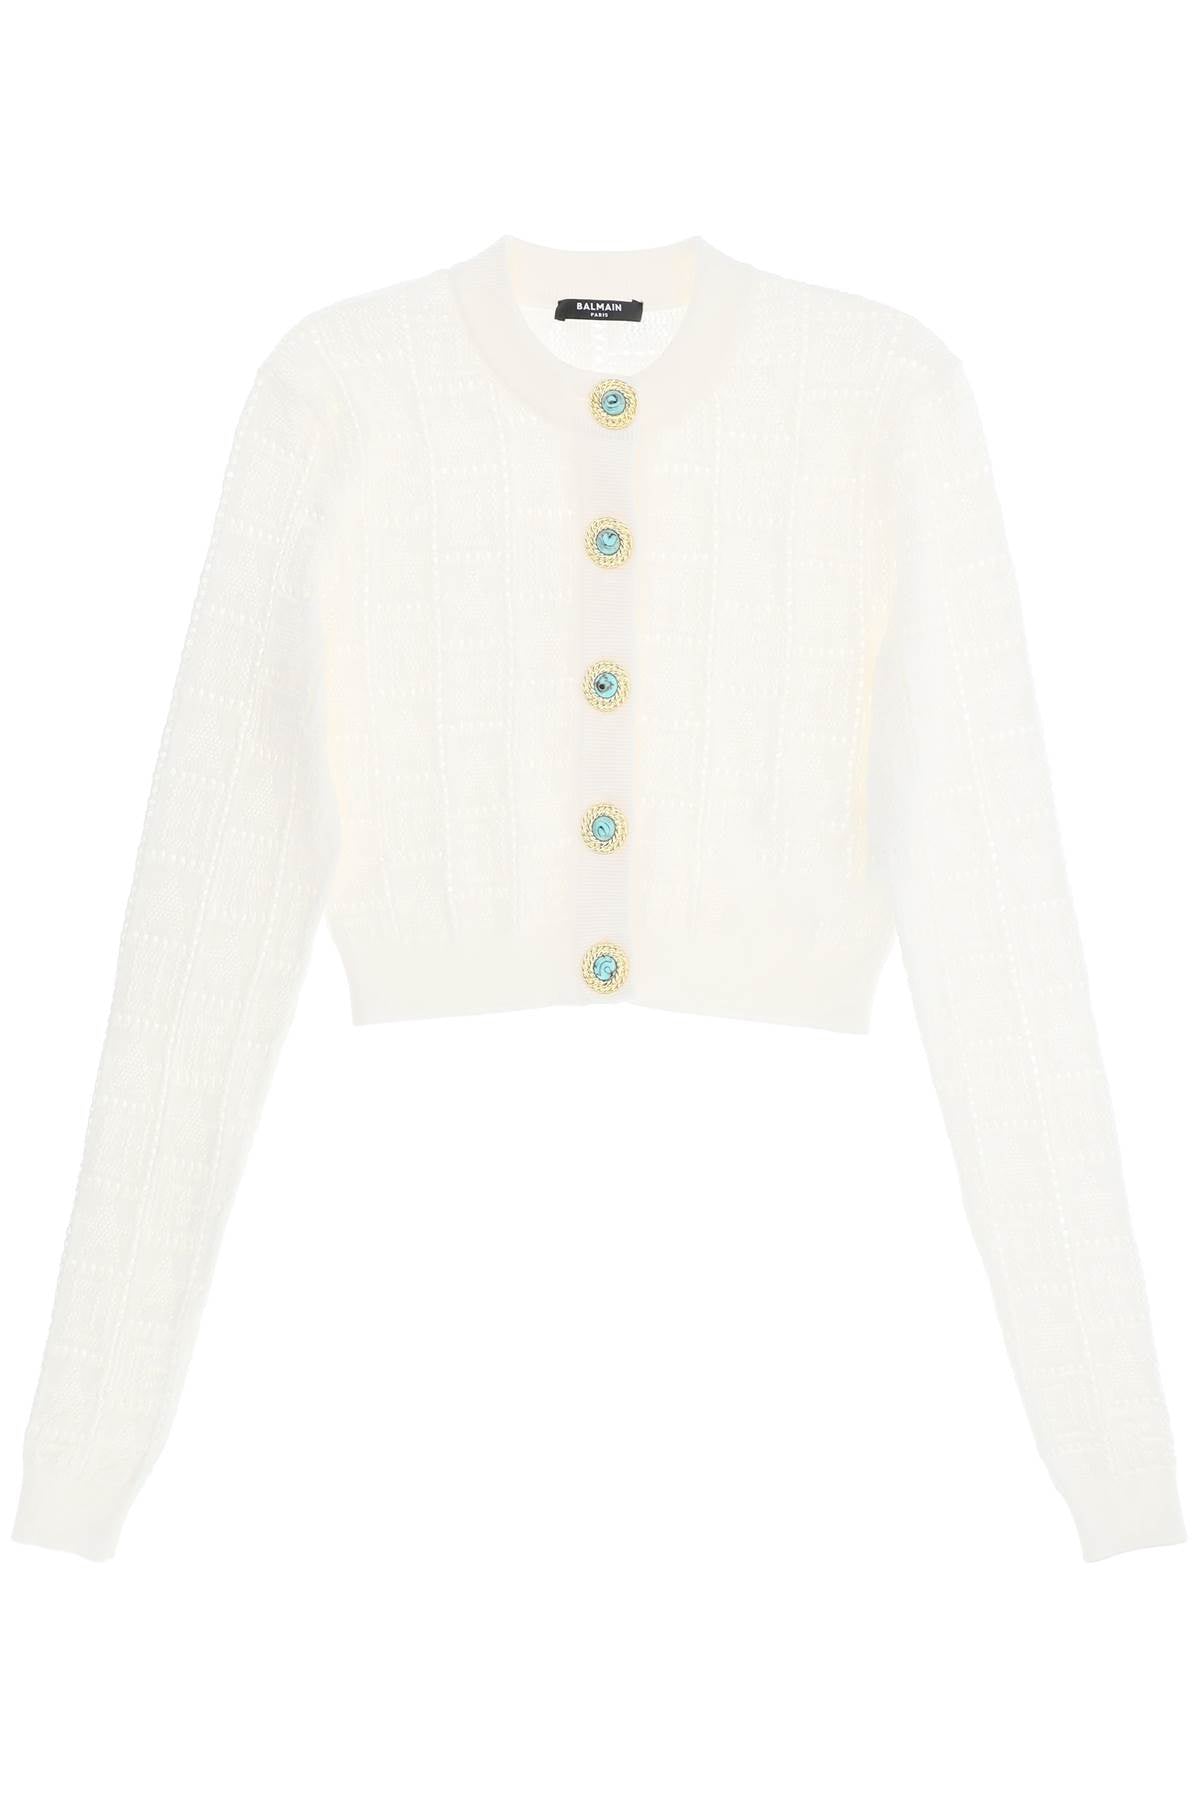 Shop Balmain Cropped Cardigan With Jewel Buttons | Pointelle Knit | White | Women's